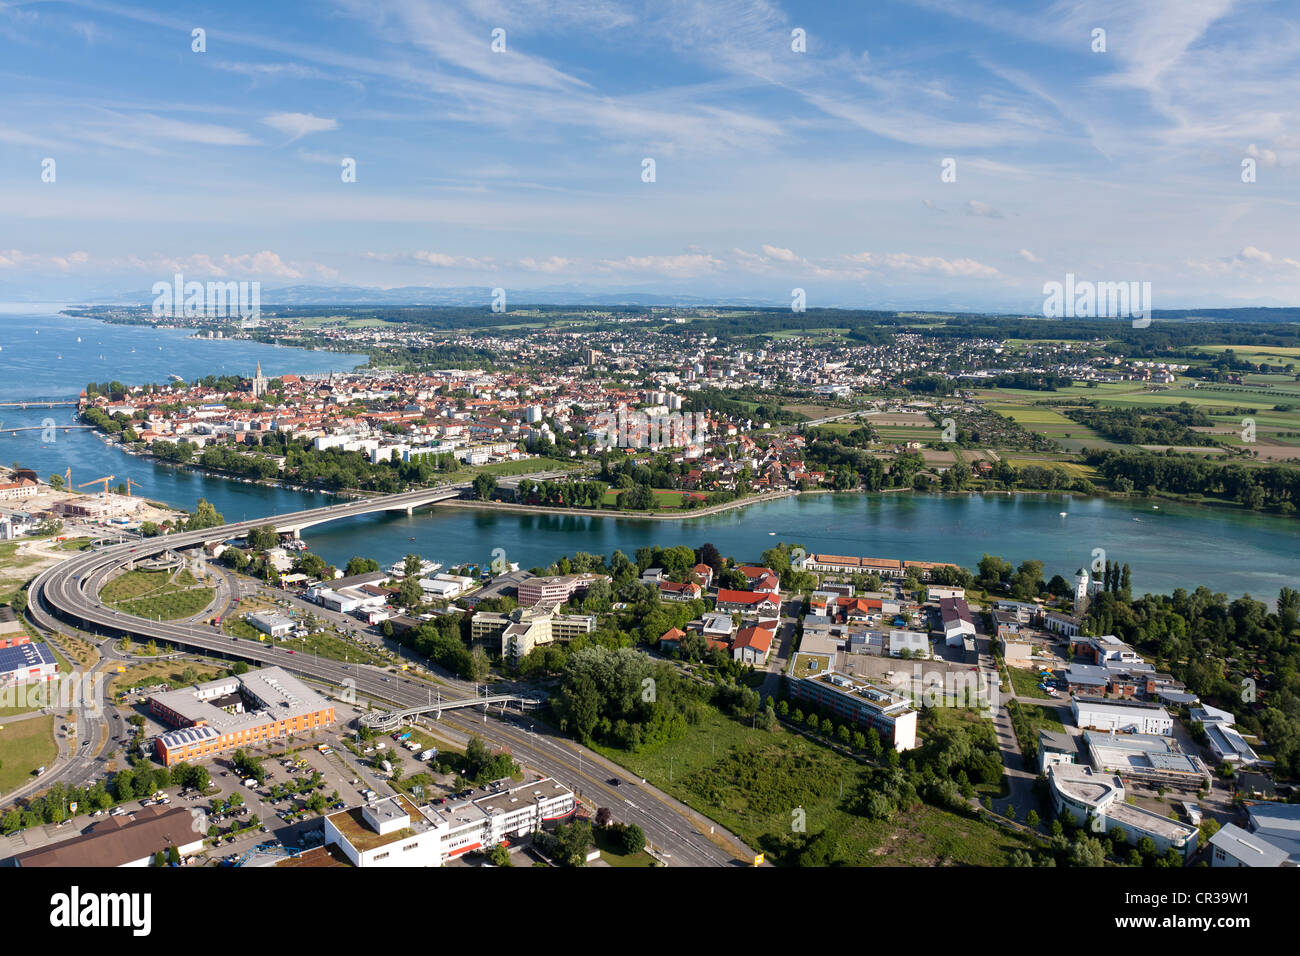 Aerial view, city of Konstanz with a view towards the Swiss Alps, Konstanz district, Baden-Wuerttemberg, Germany, Europe Stock Photo